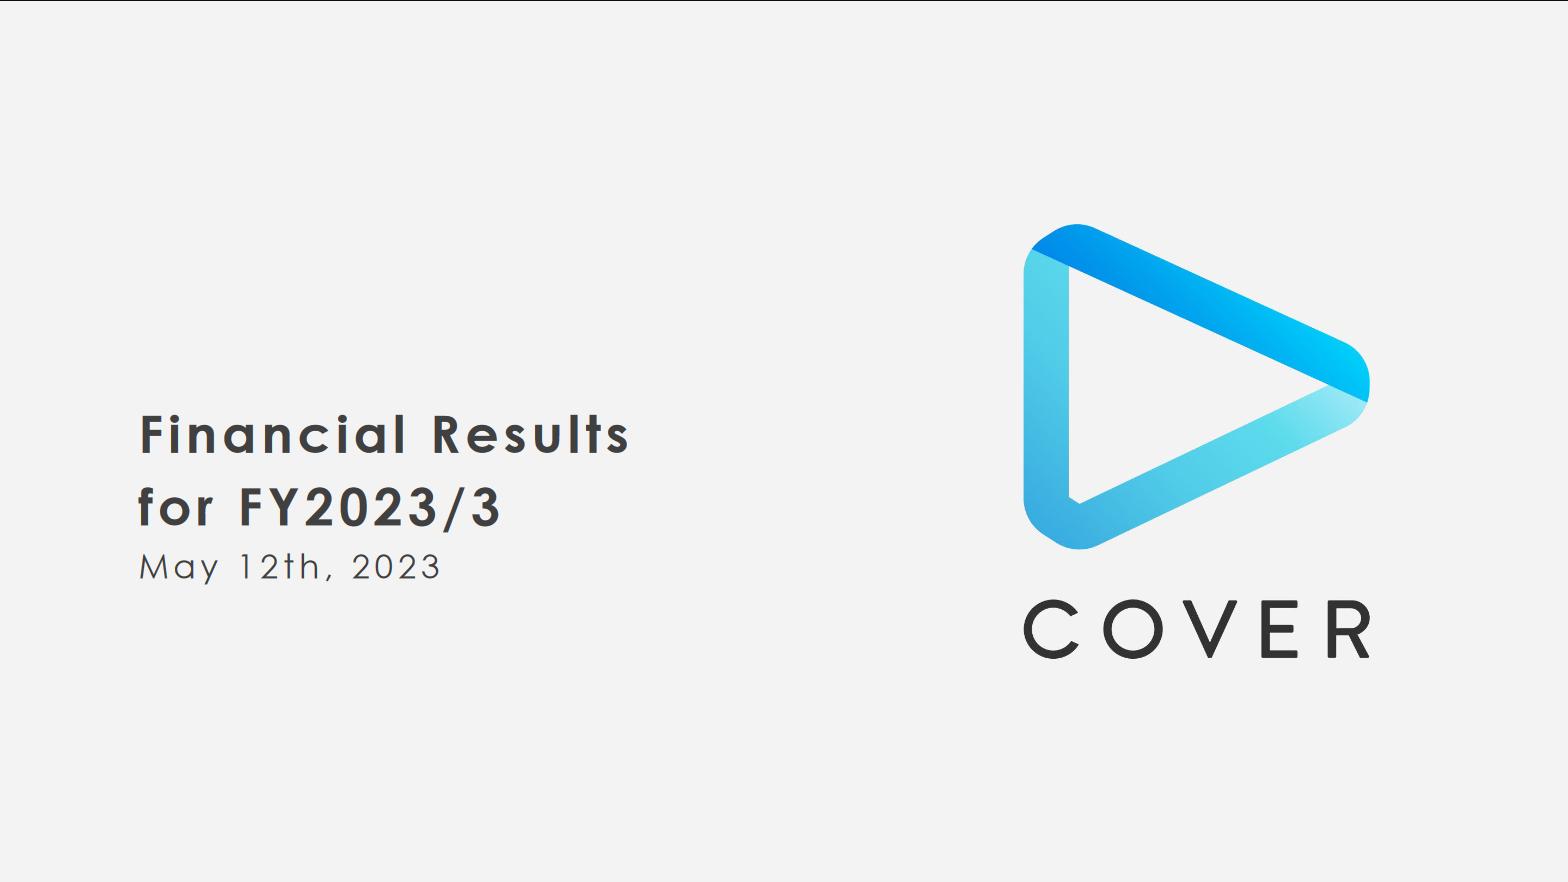 cover-corp-financial-results-1.png